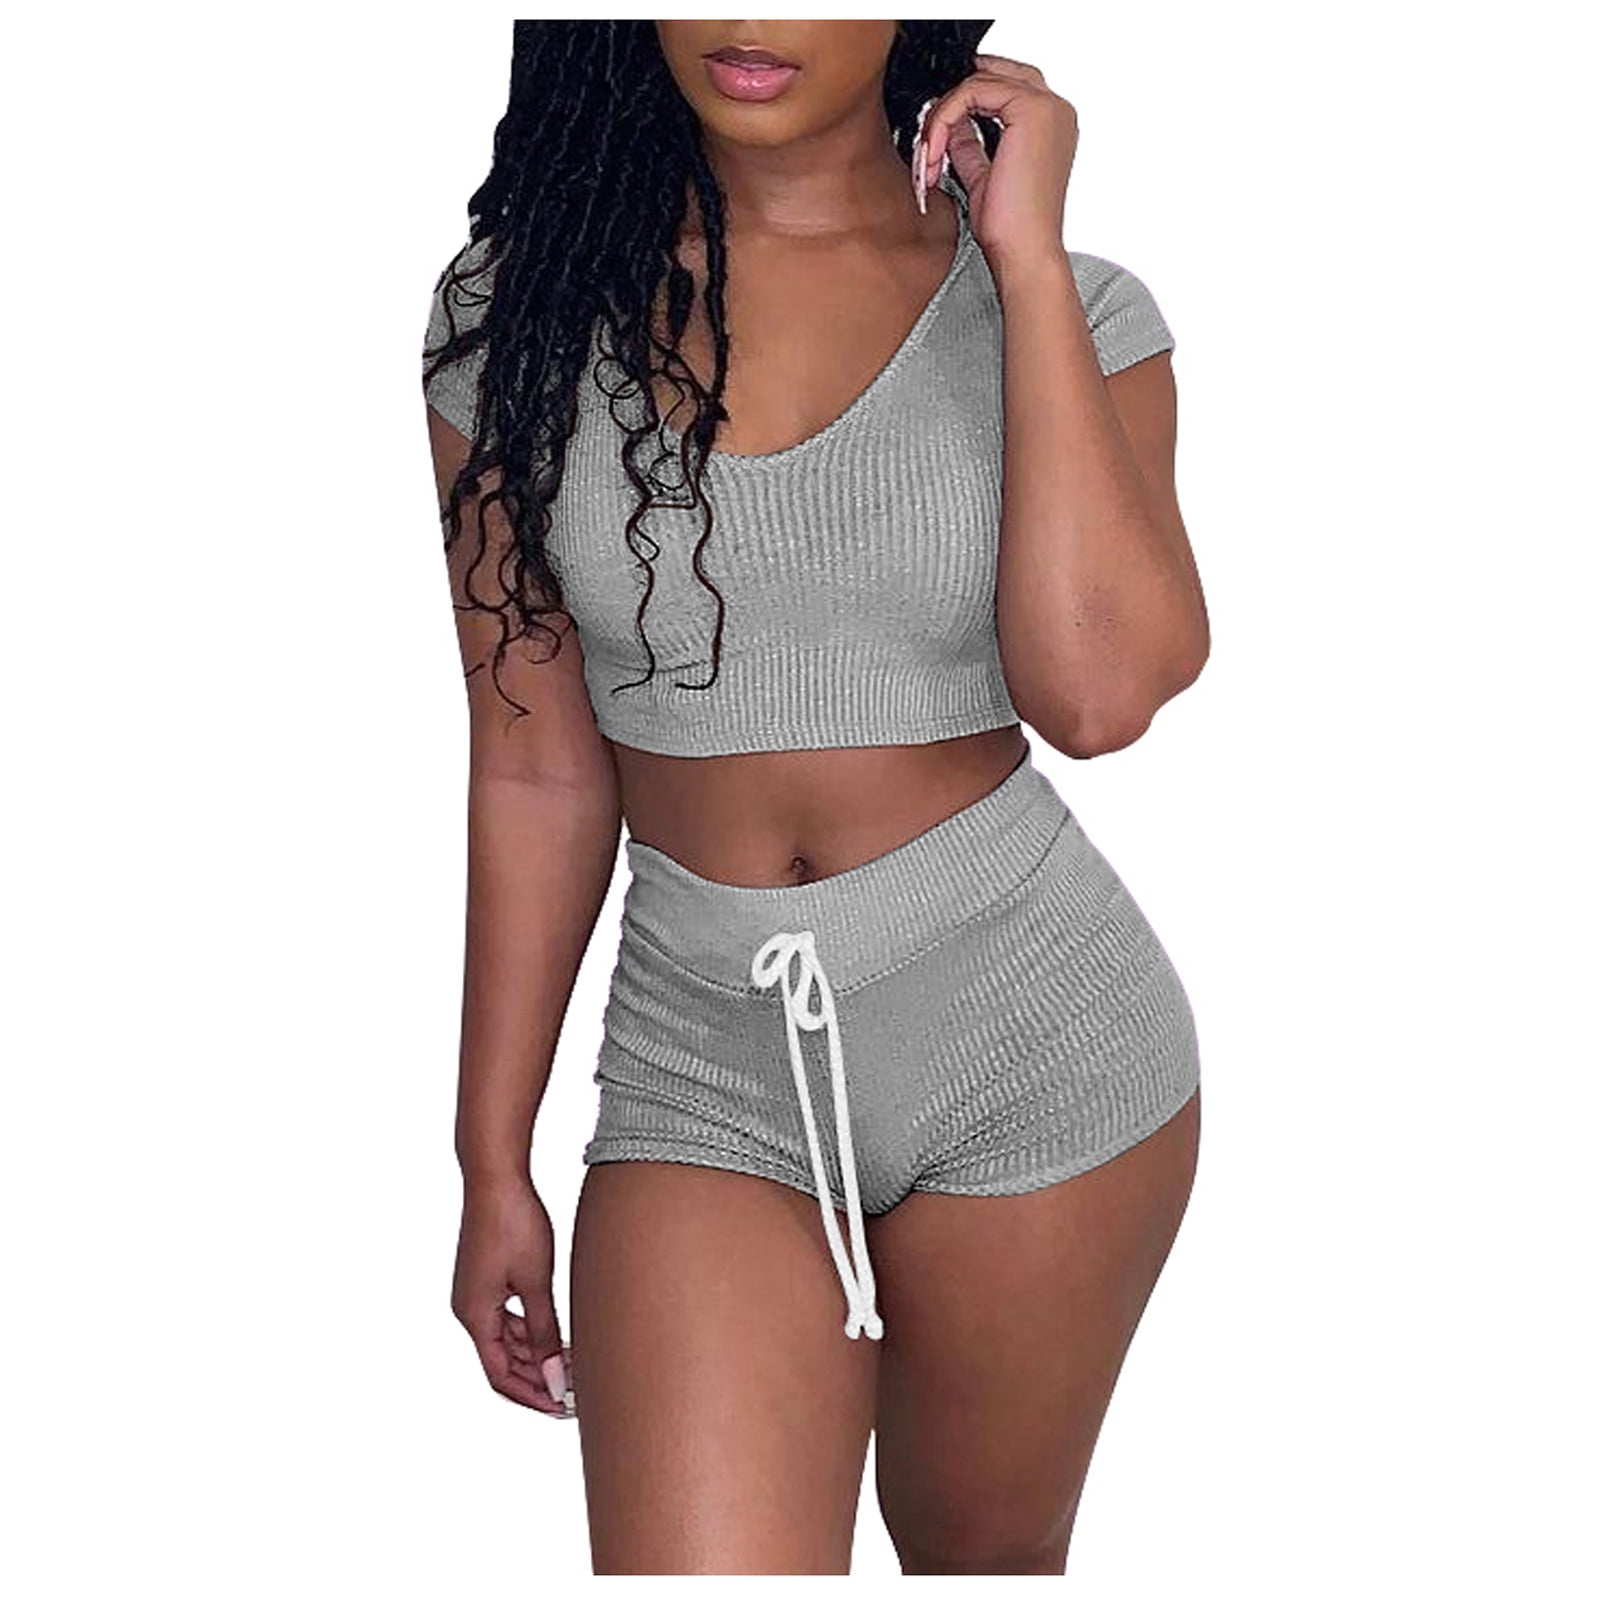 Summer Shorts For Women Fashion Women Cute Solid Color Sportswear Suit 2PC  Tracksuit Short Sleeve Sets Sleep Shorts For Women,Gray,L 